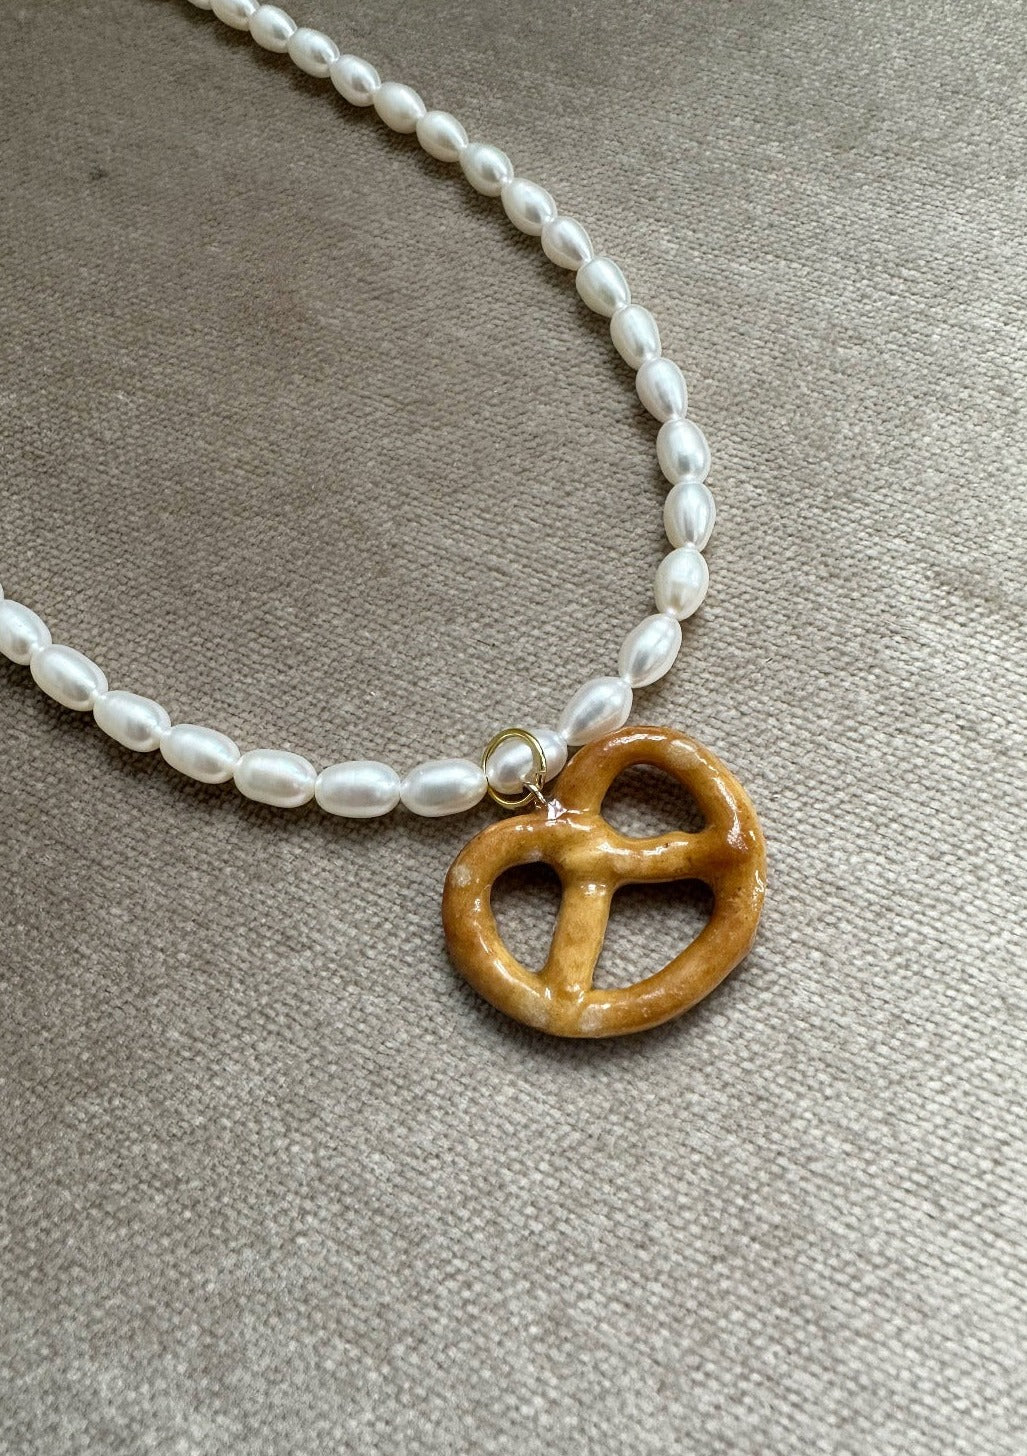 Resin coated pretzel on beaded pearl necklace with gold clasp.